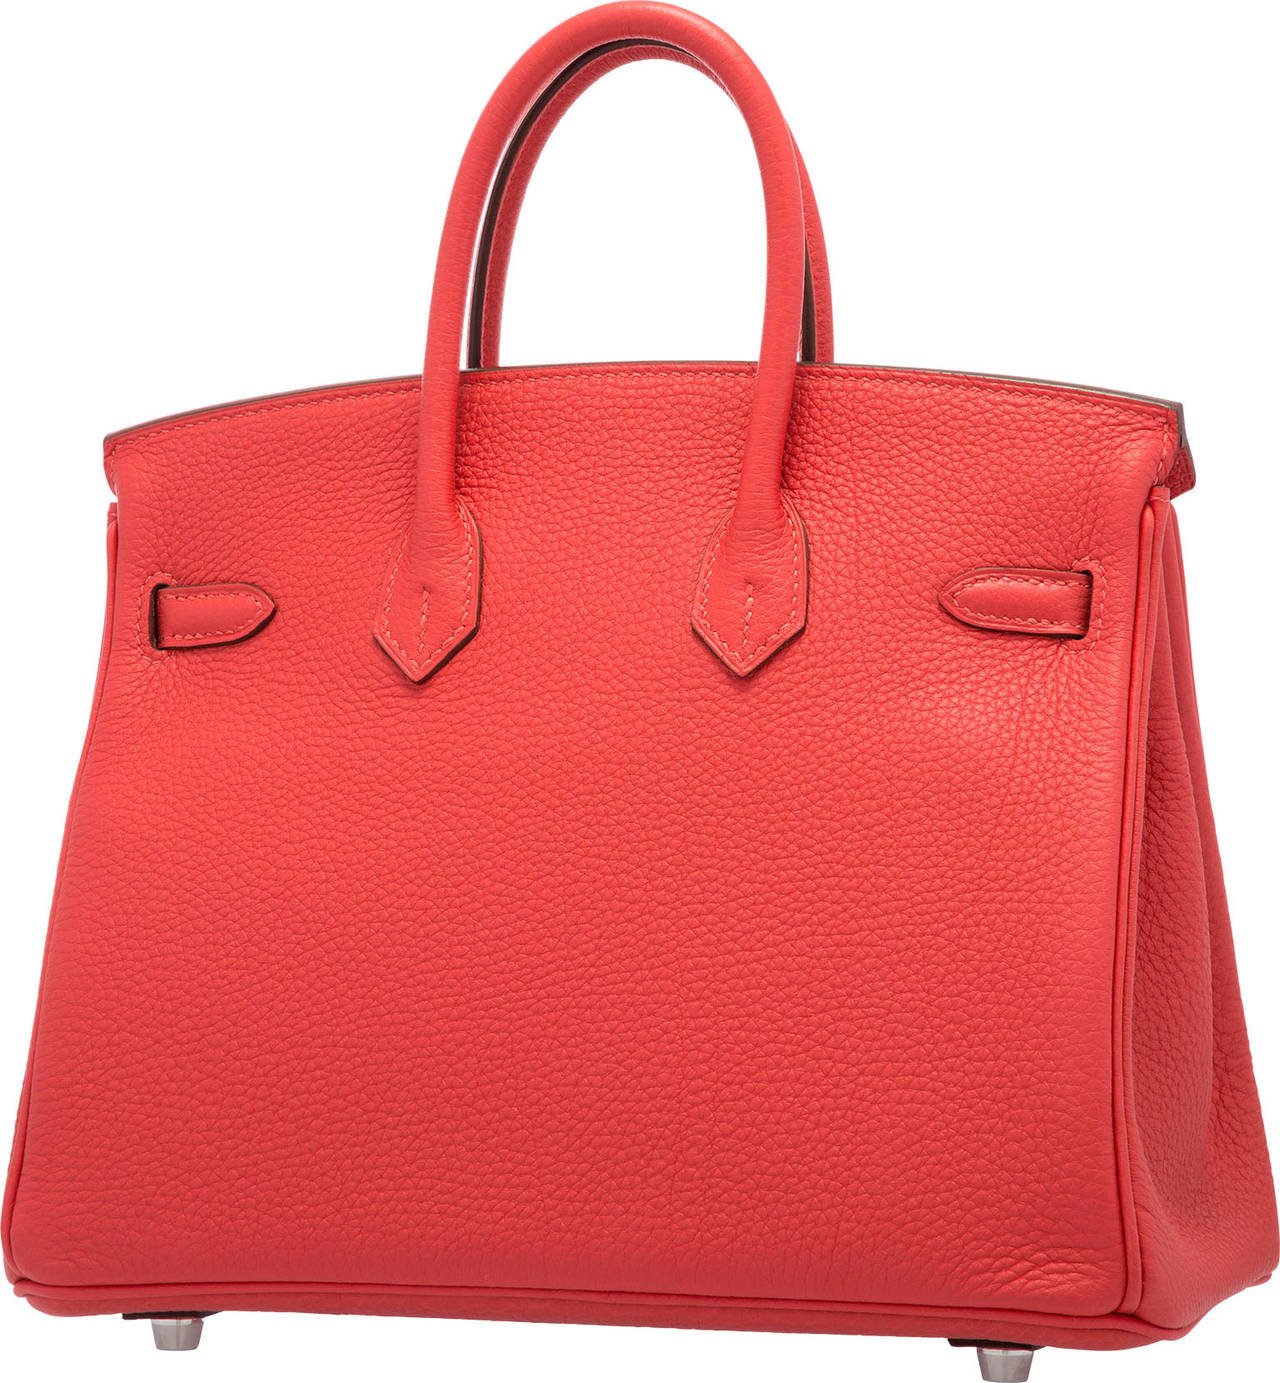 Hermes 25cm Rouge Pivoine Clemence Leather Birkin Bag with Palladium Hardware In New Condition For Sale In New York, NY